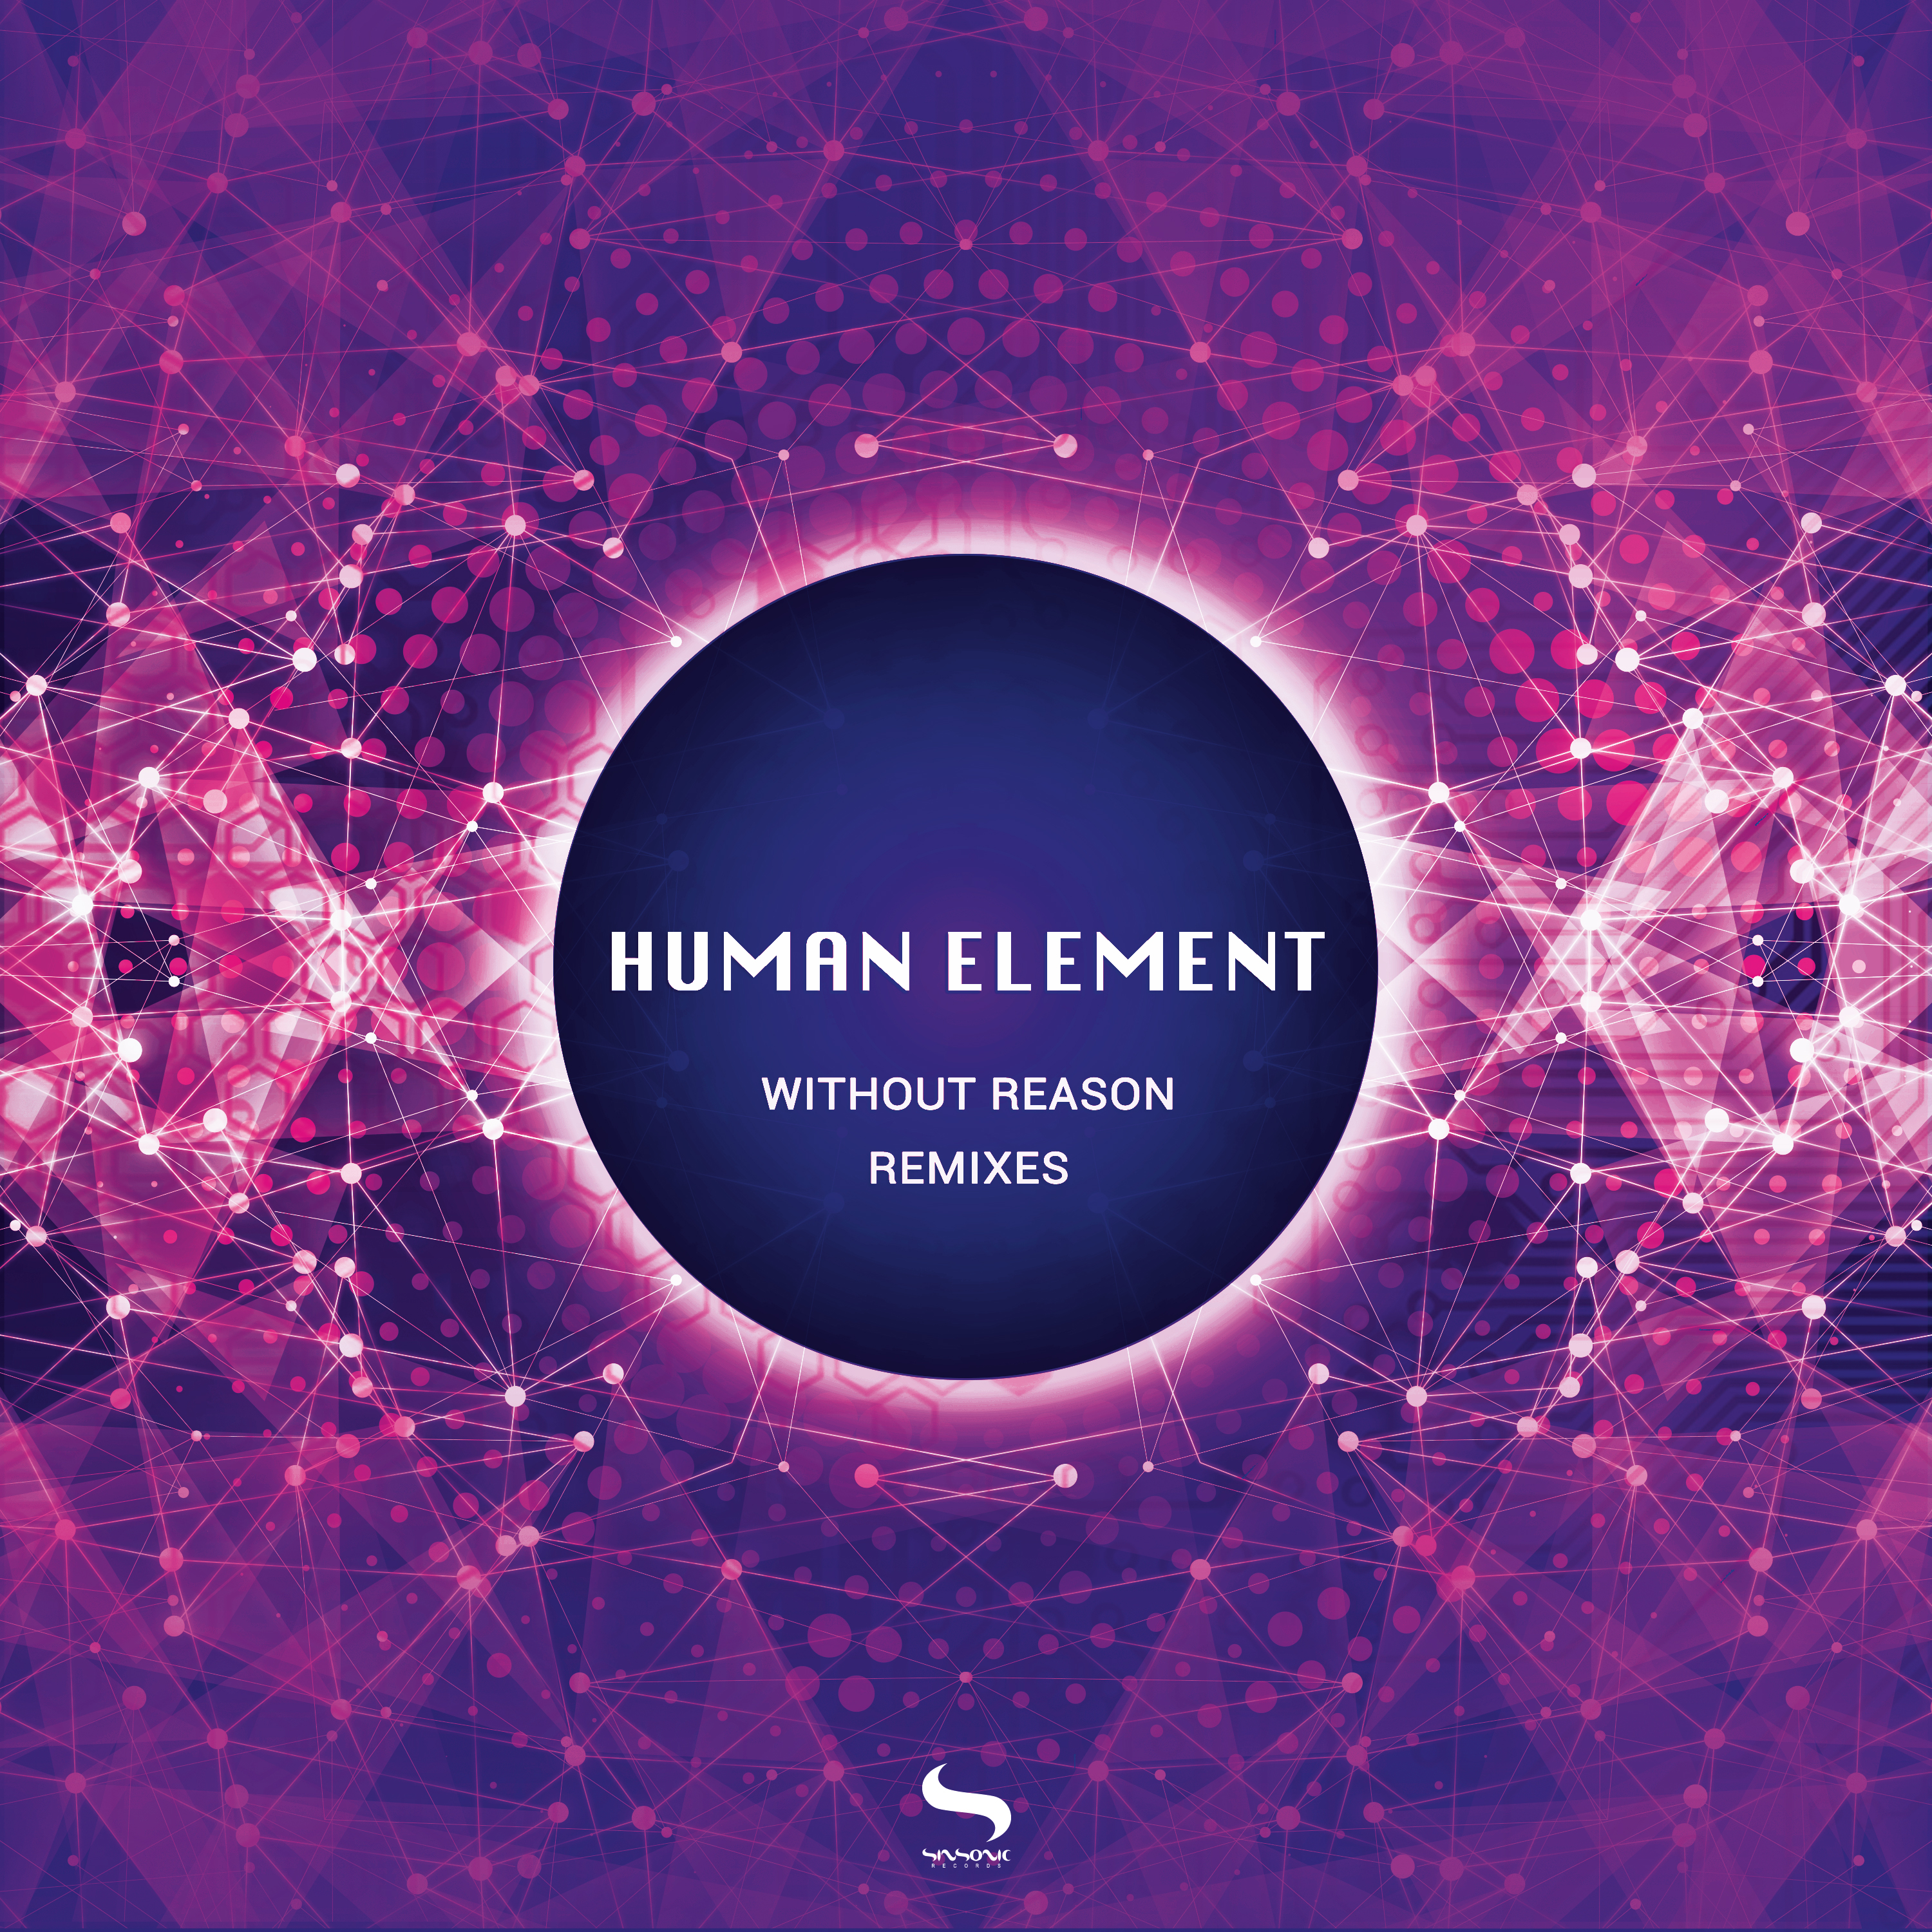 Хуман элемент. Remixes. Without reason. Human elements Lable.